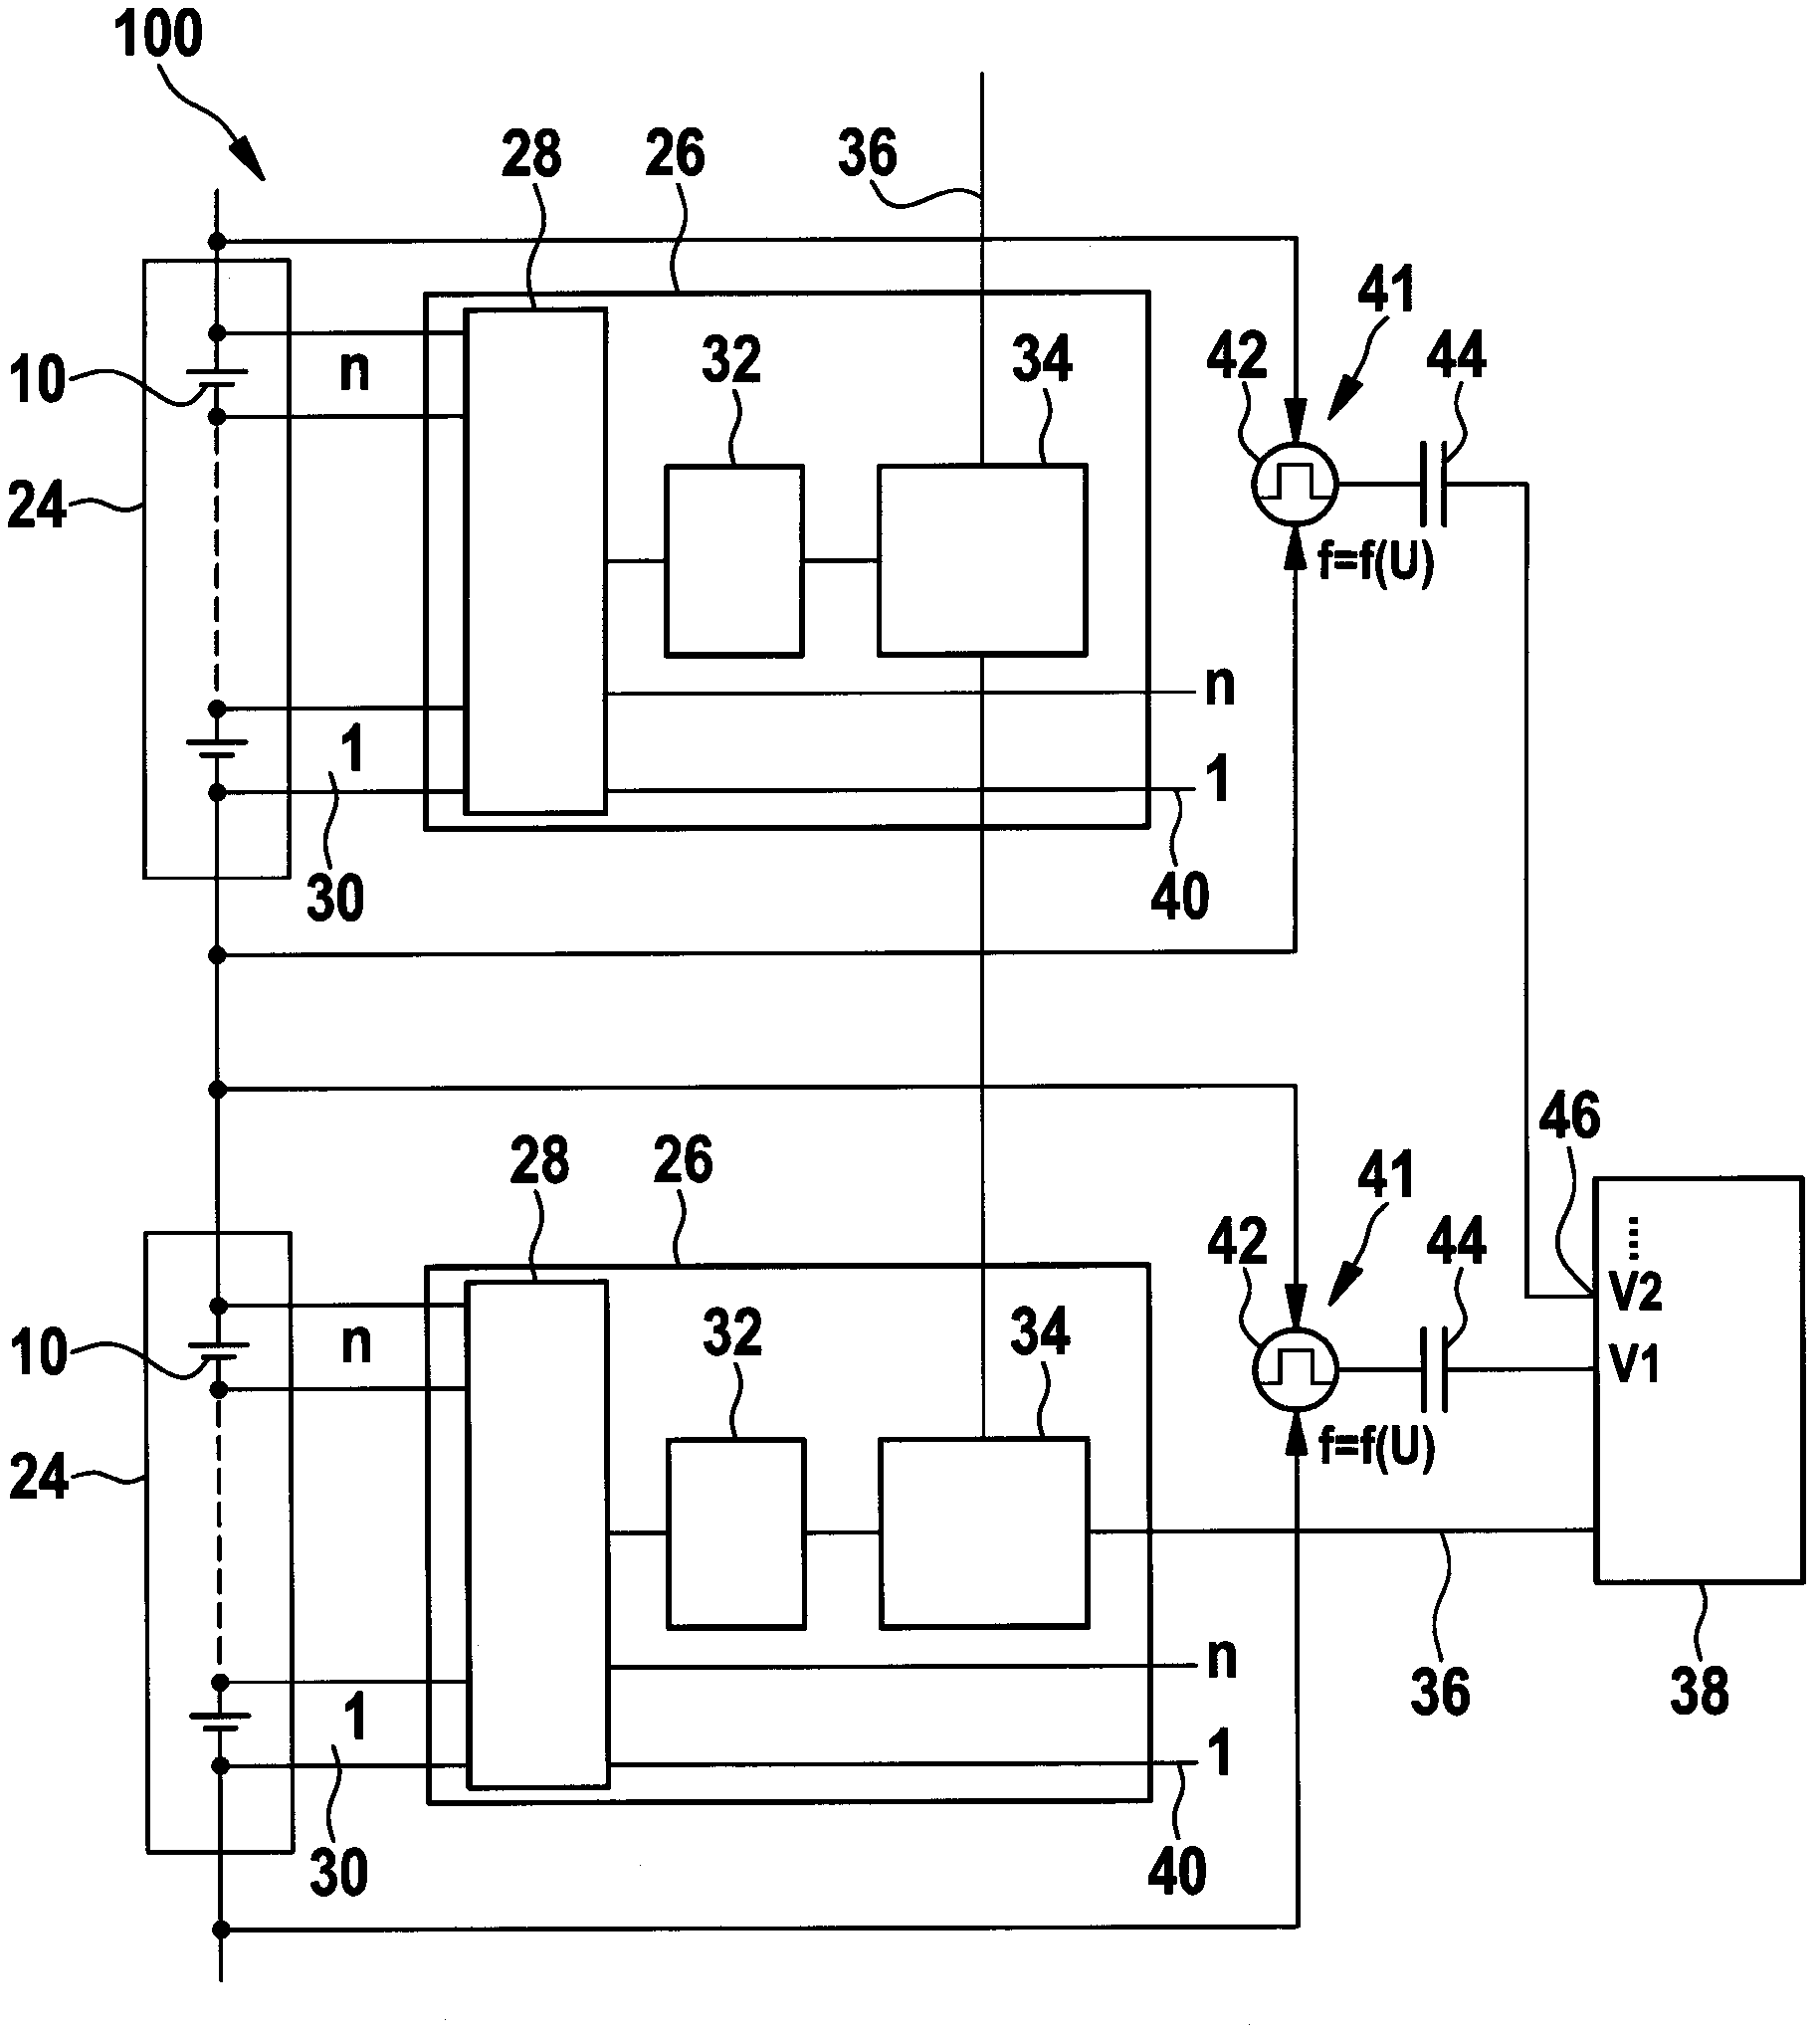 Battery system for measuring battery module voltages